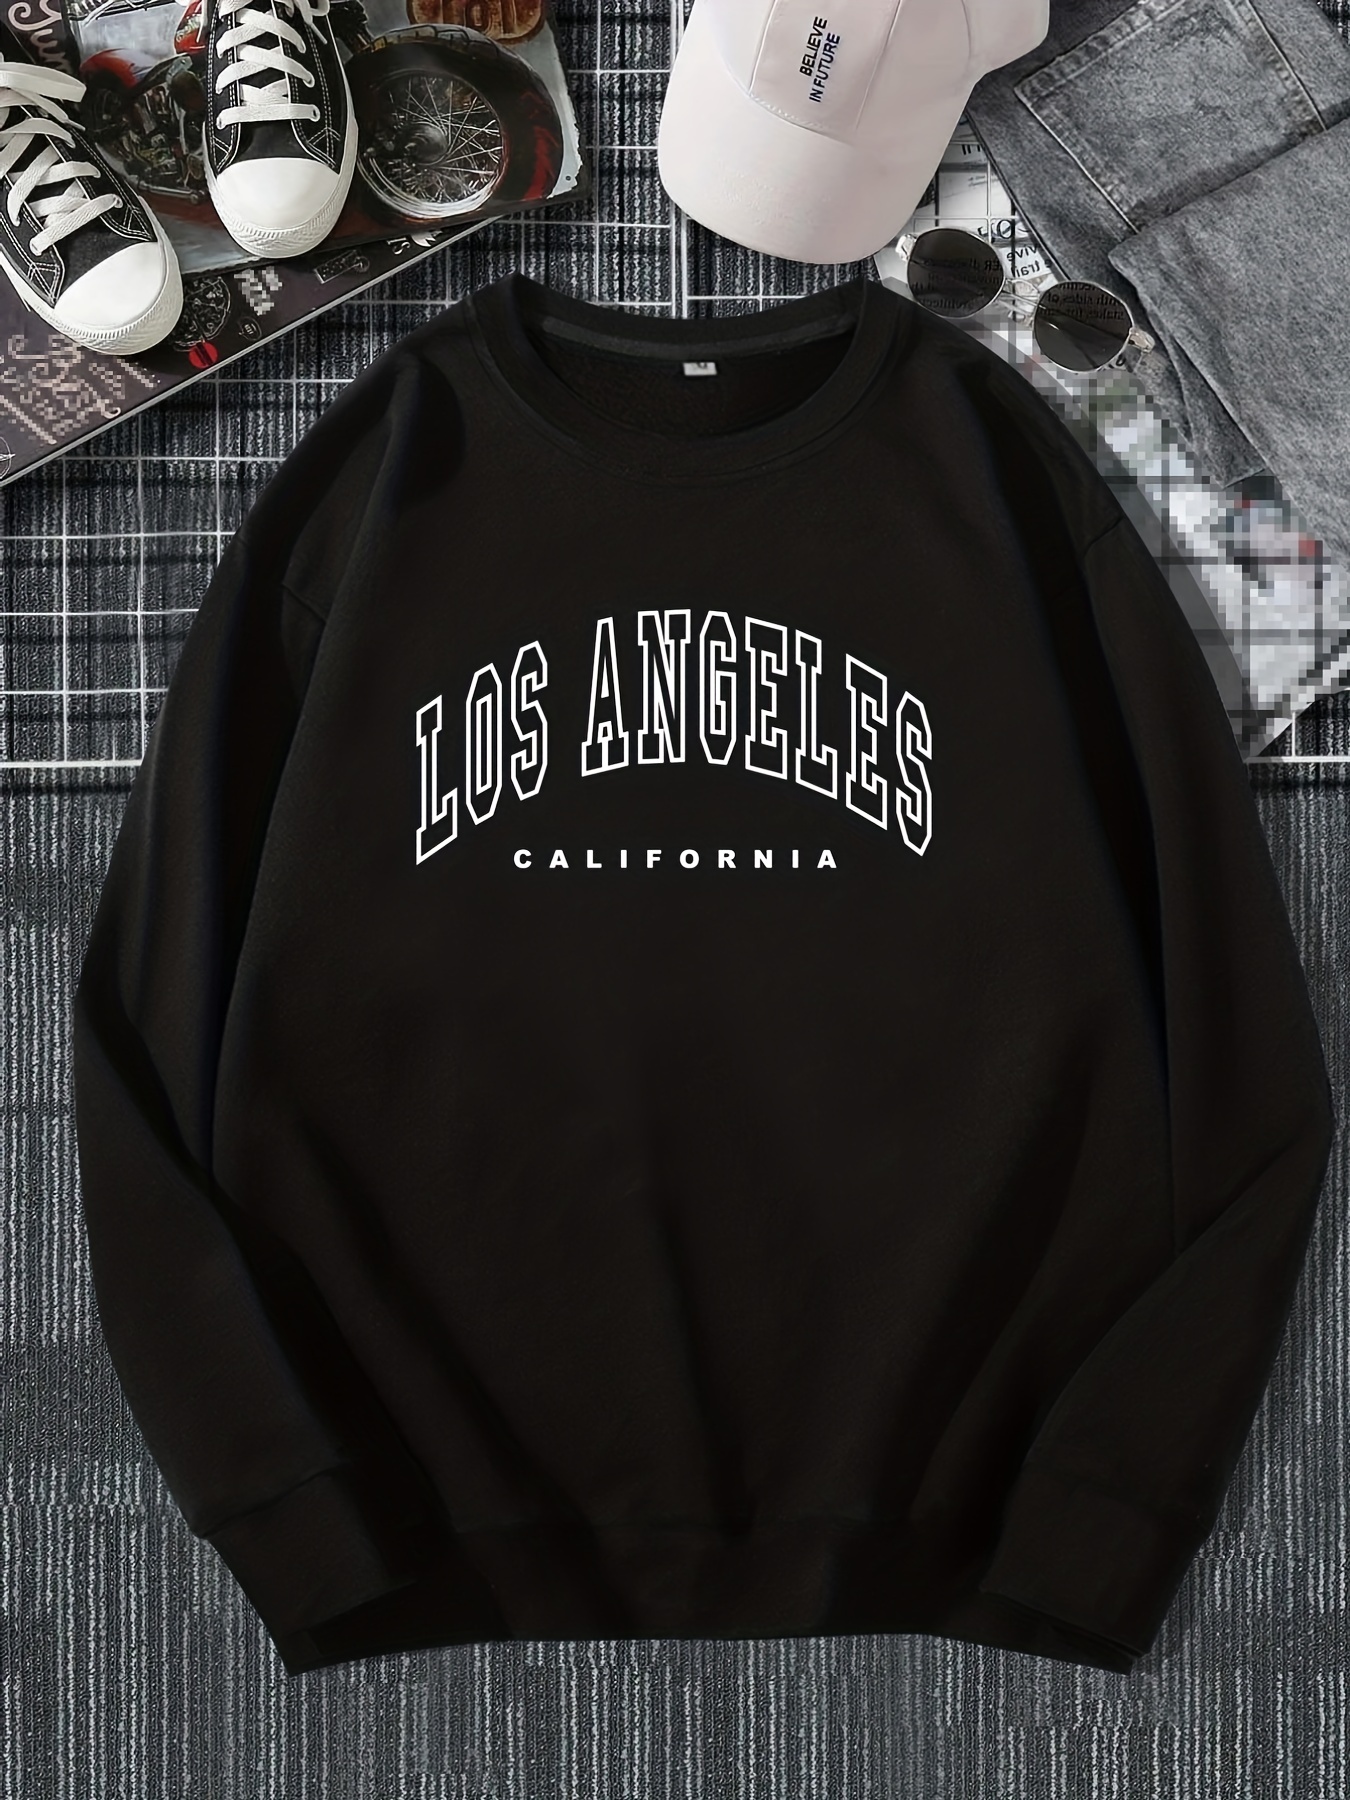 5 Cool Ways to Wear a Hoodie - Los Angeles Tech + Startups